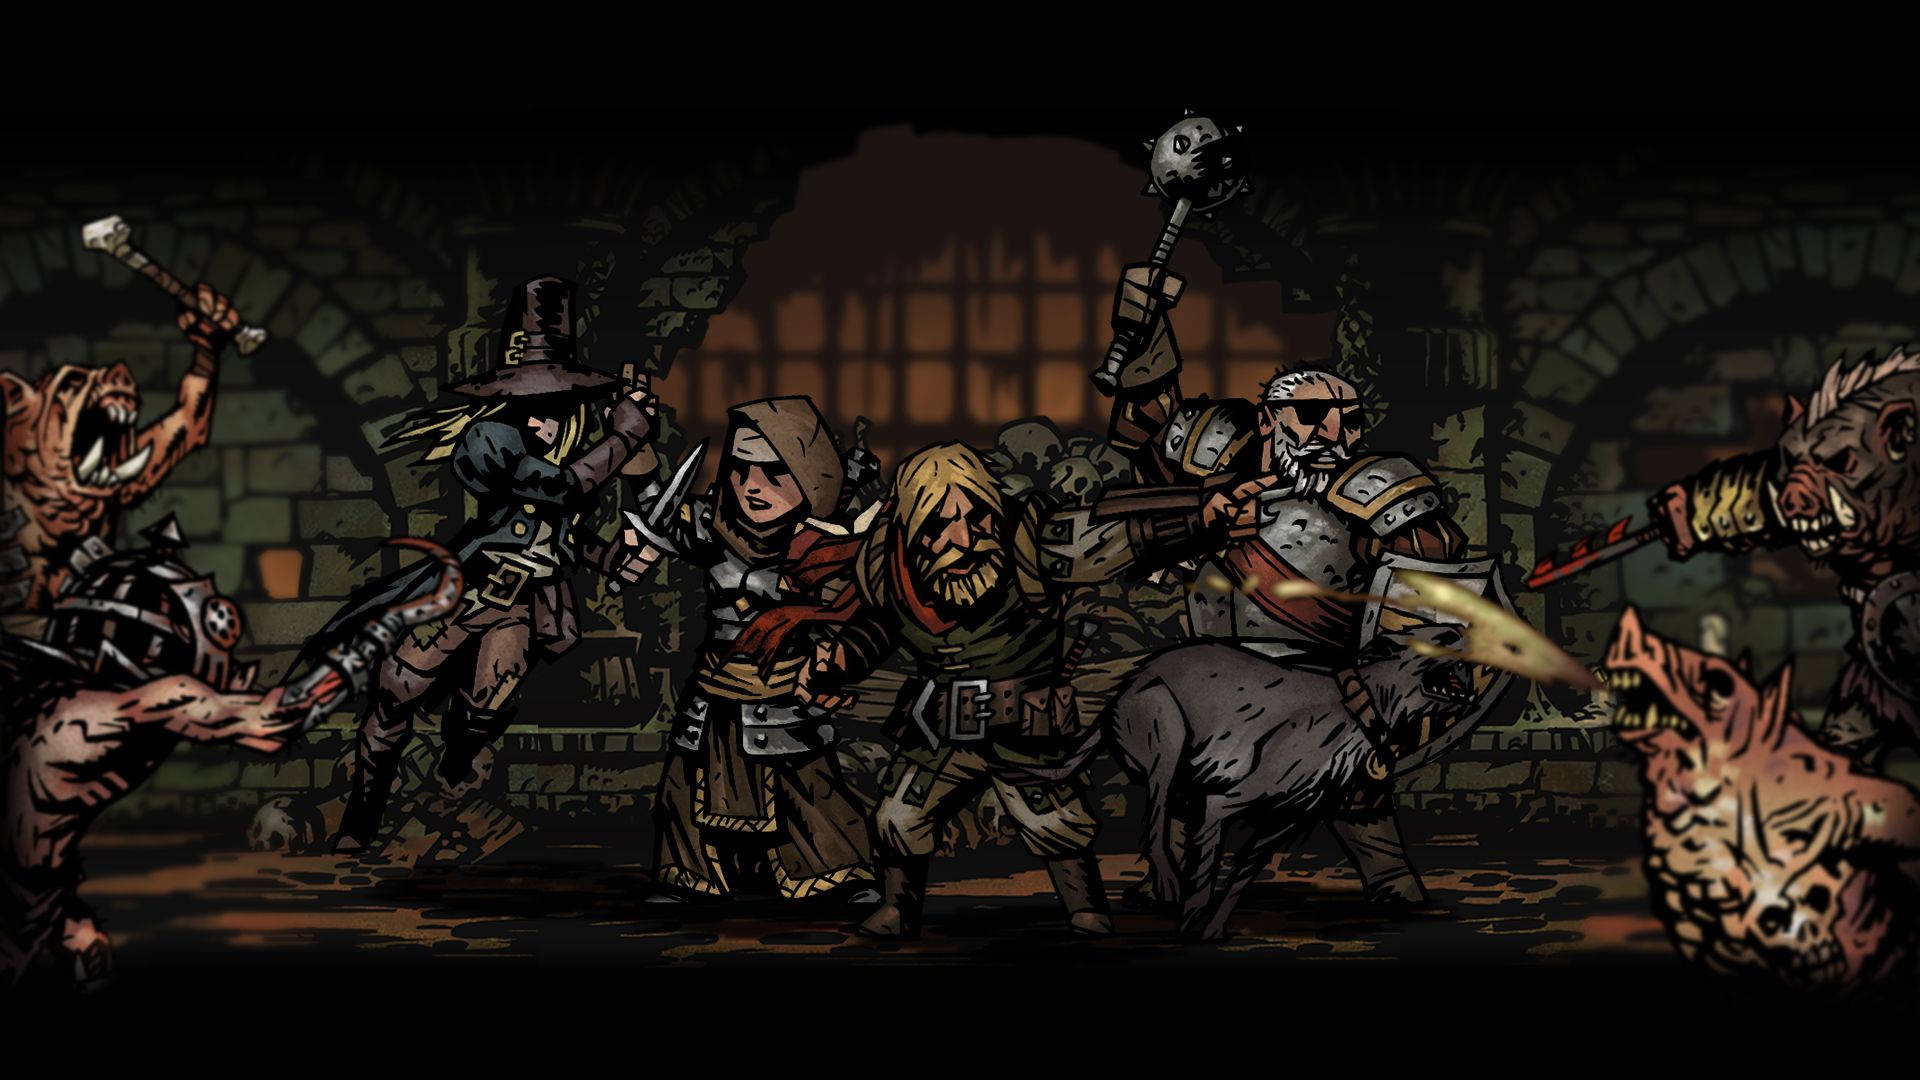 Two warriors rally together to take on Darkest Dungeon. Wallpaper